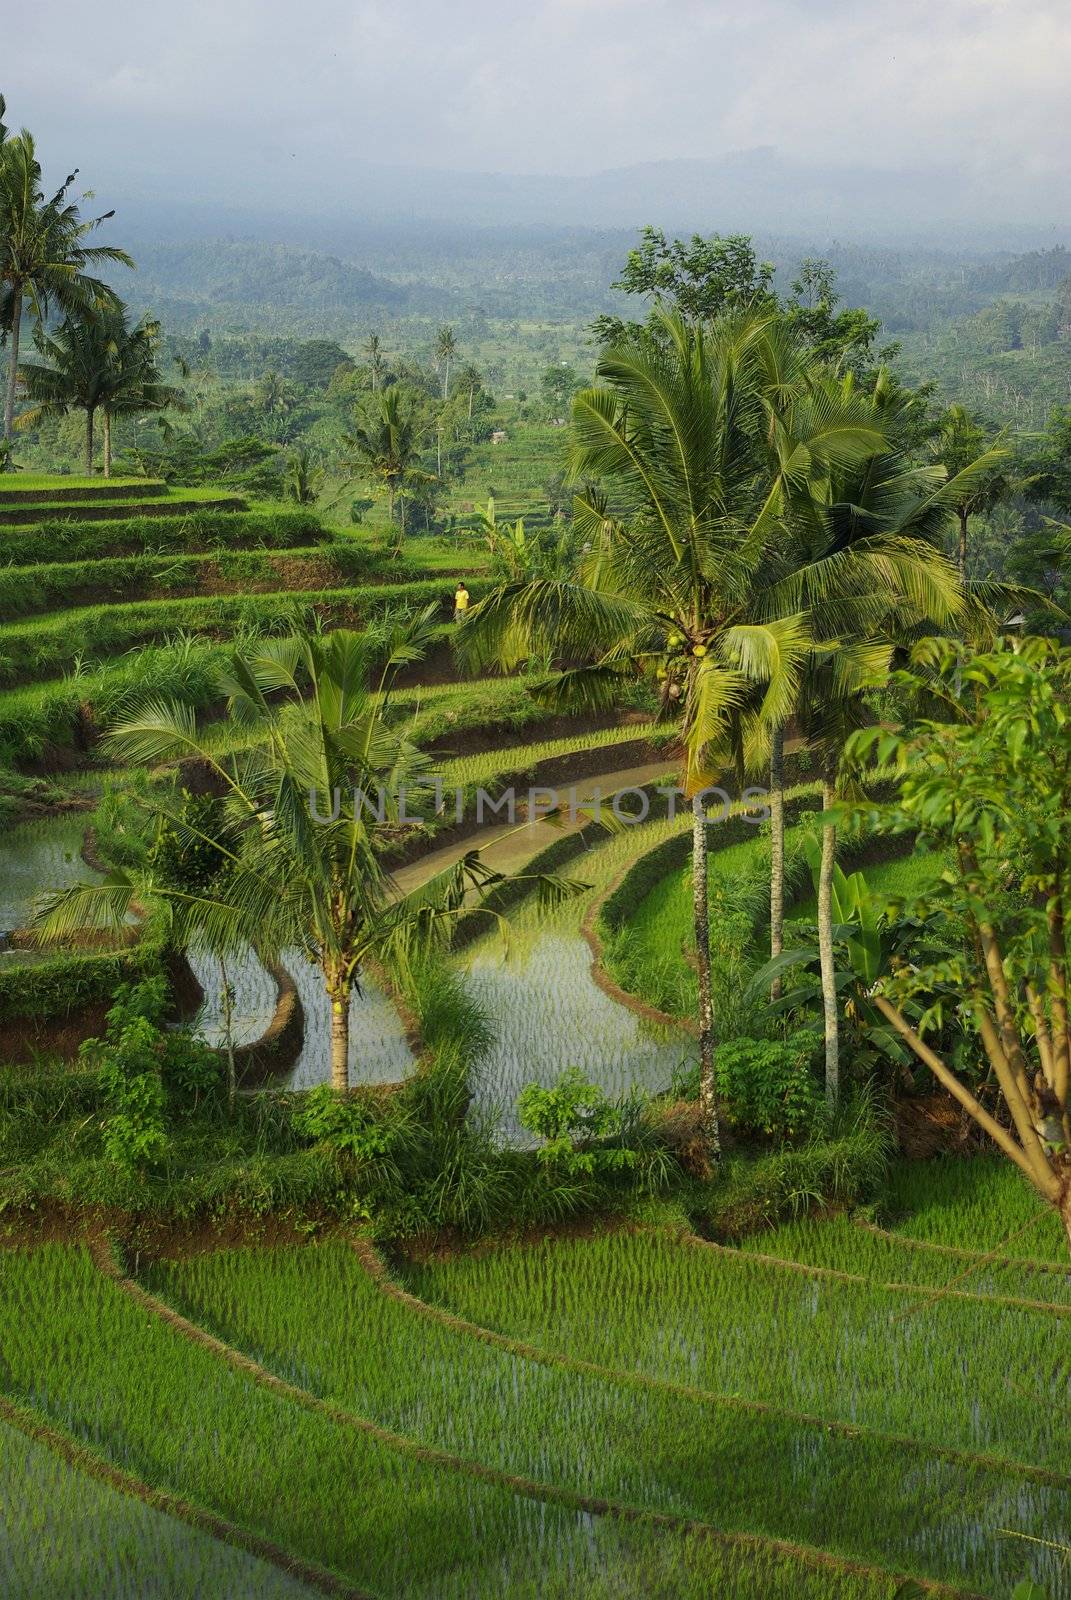 Landscape of young watered ricefields in Bali by shkyo30